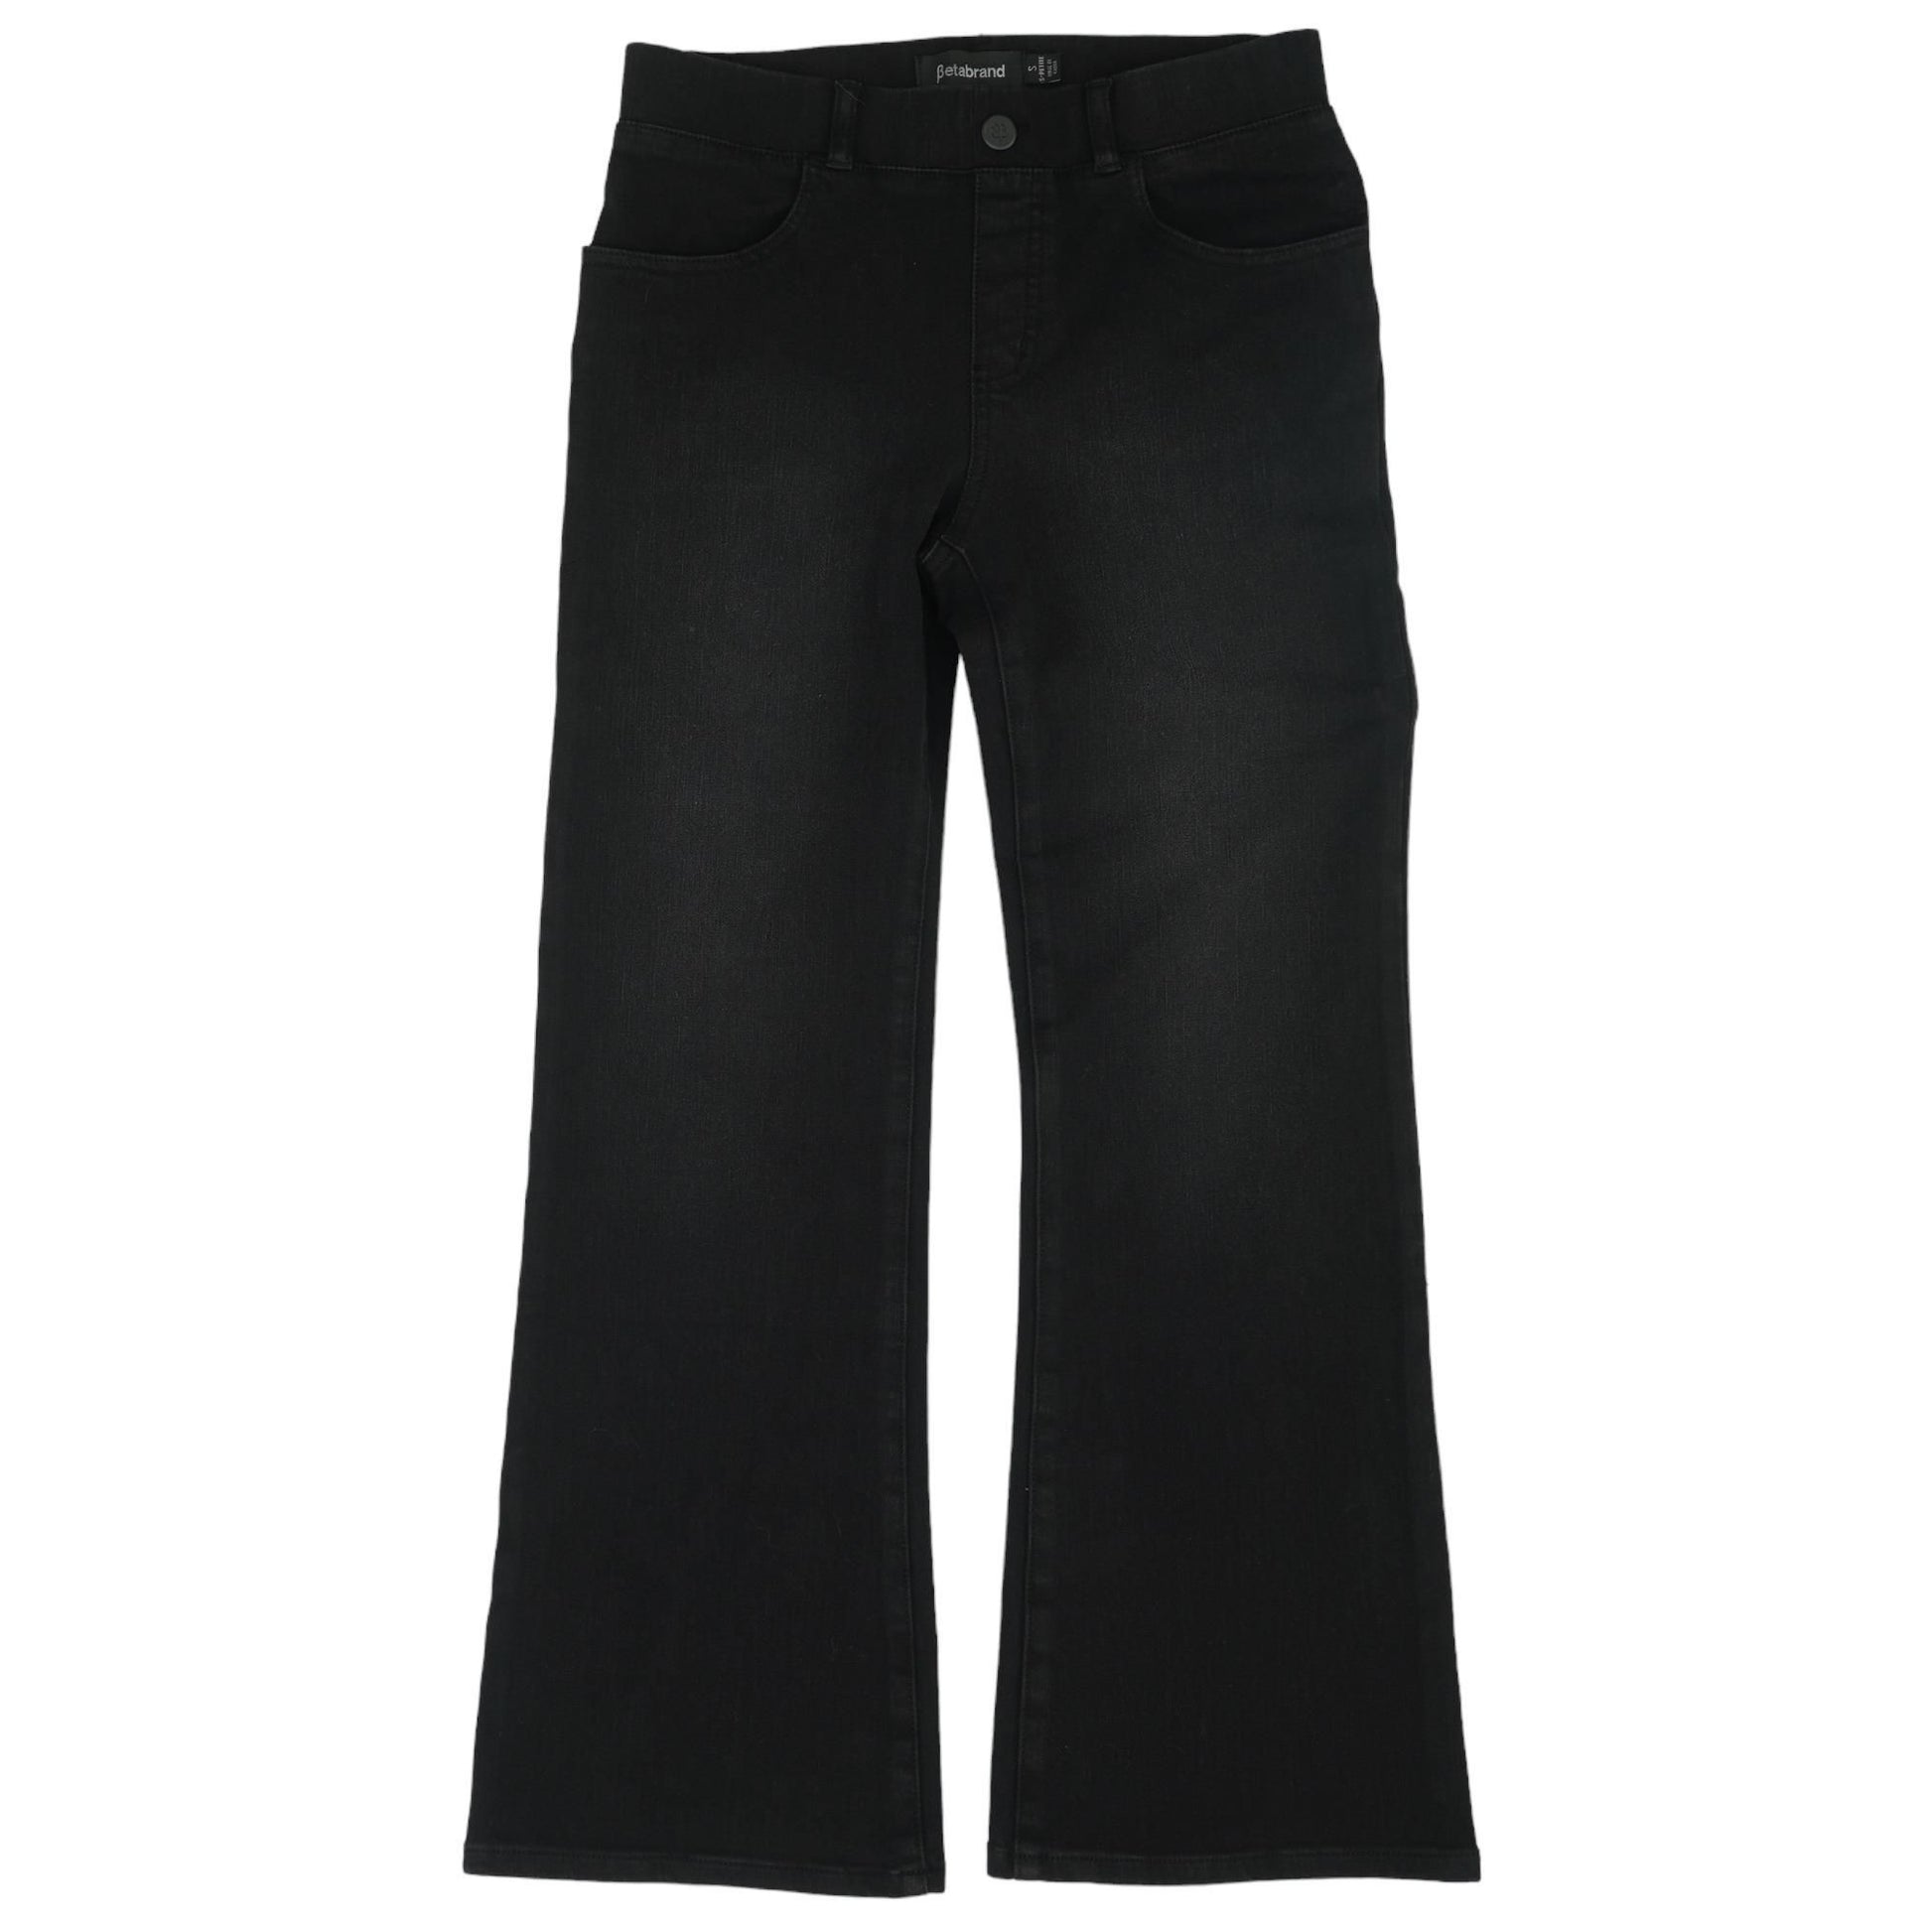 Black Solid Mid Rise Bell Bottom Jeans – Unclaimed Baggage